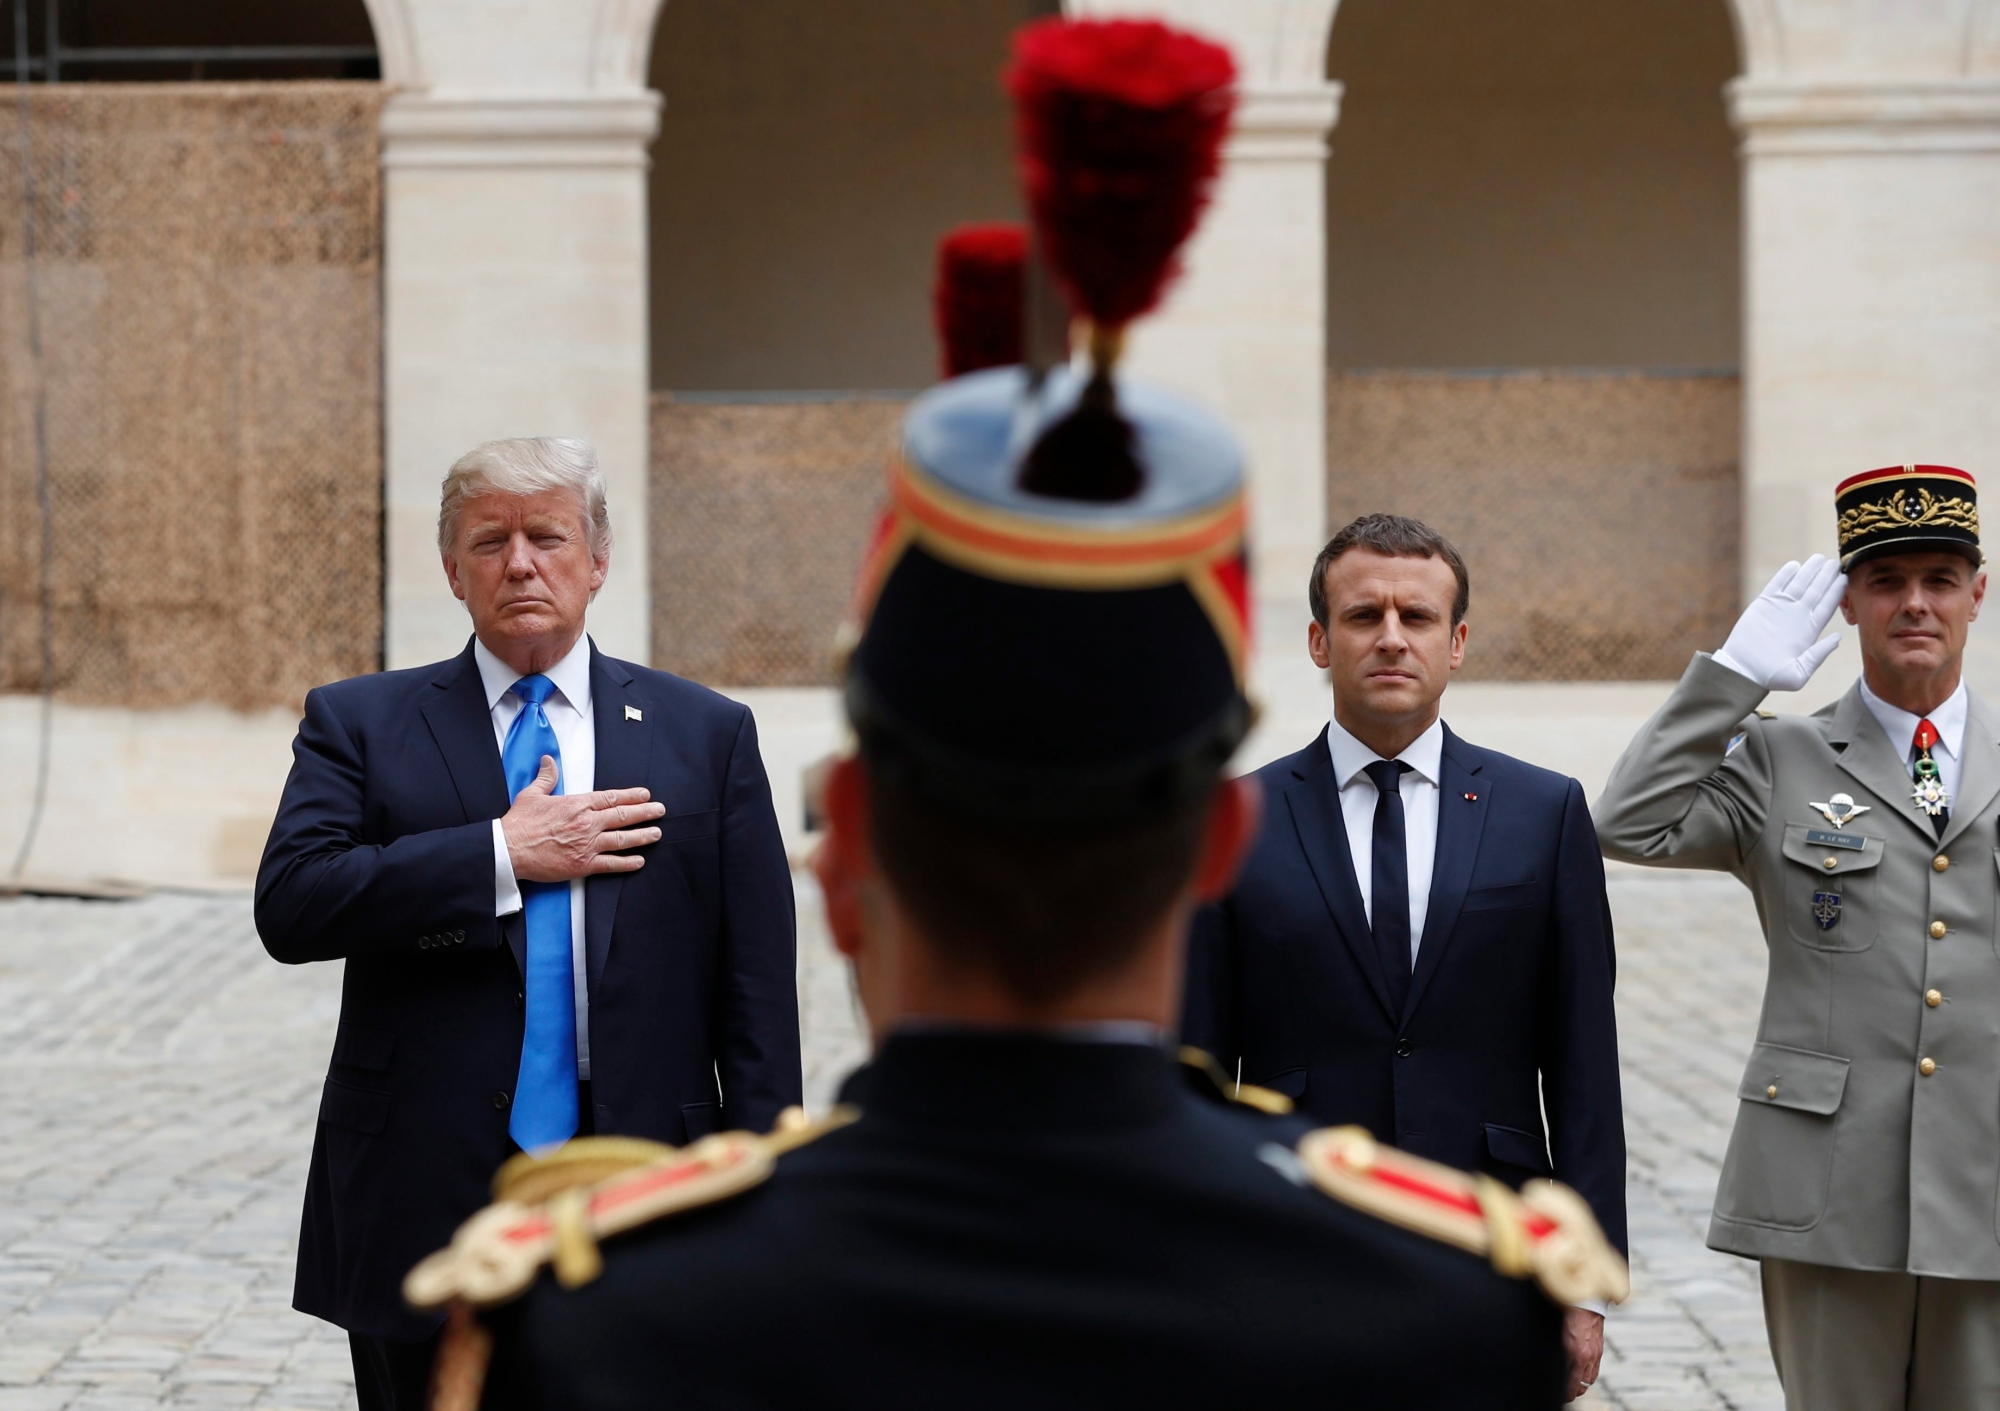 French President Emmanuel Macron and U.S. President Donald Trump, left, listen to national anthems during a welcoming ceremony at Les Invalides in Paris, Thursday, July 13, 2017. Trump and French President Emmanuel Macron are meeting at the Invalides monument for a tour of the golden-domed building housing some of France's greatest war heroes, including Napoleon Bonaparte and the Supreme Allied Commander in World War I. (Yves Herman, Pool via AP) France Trump